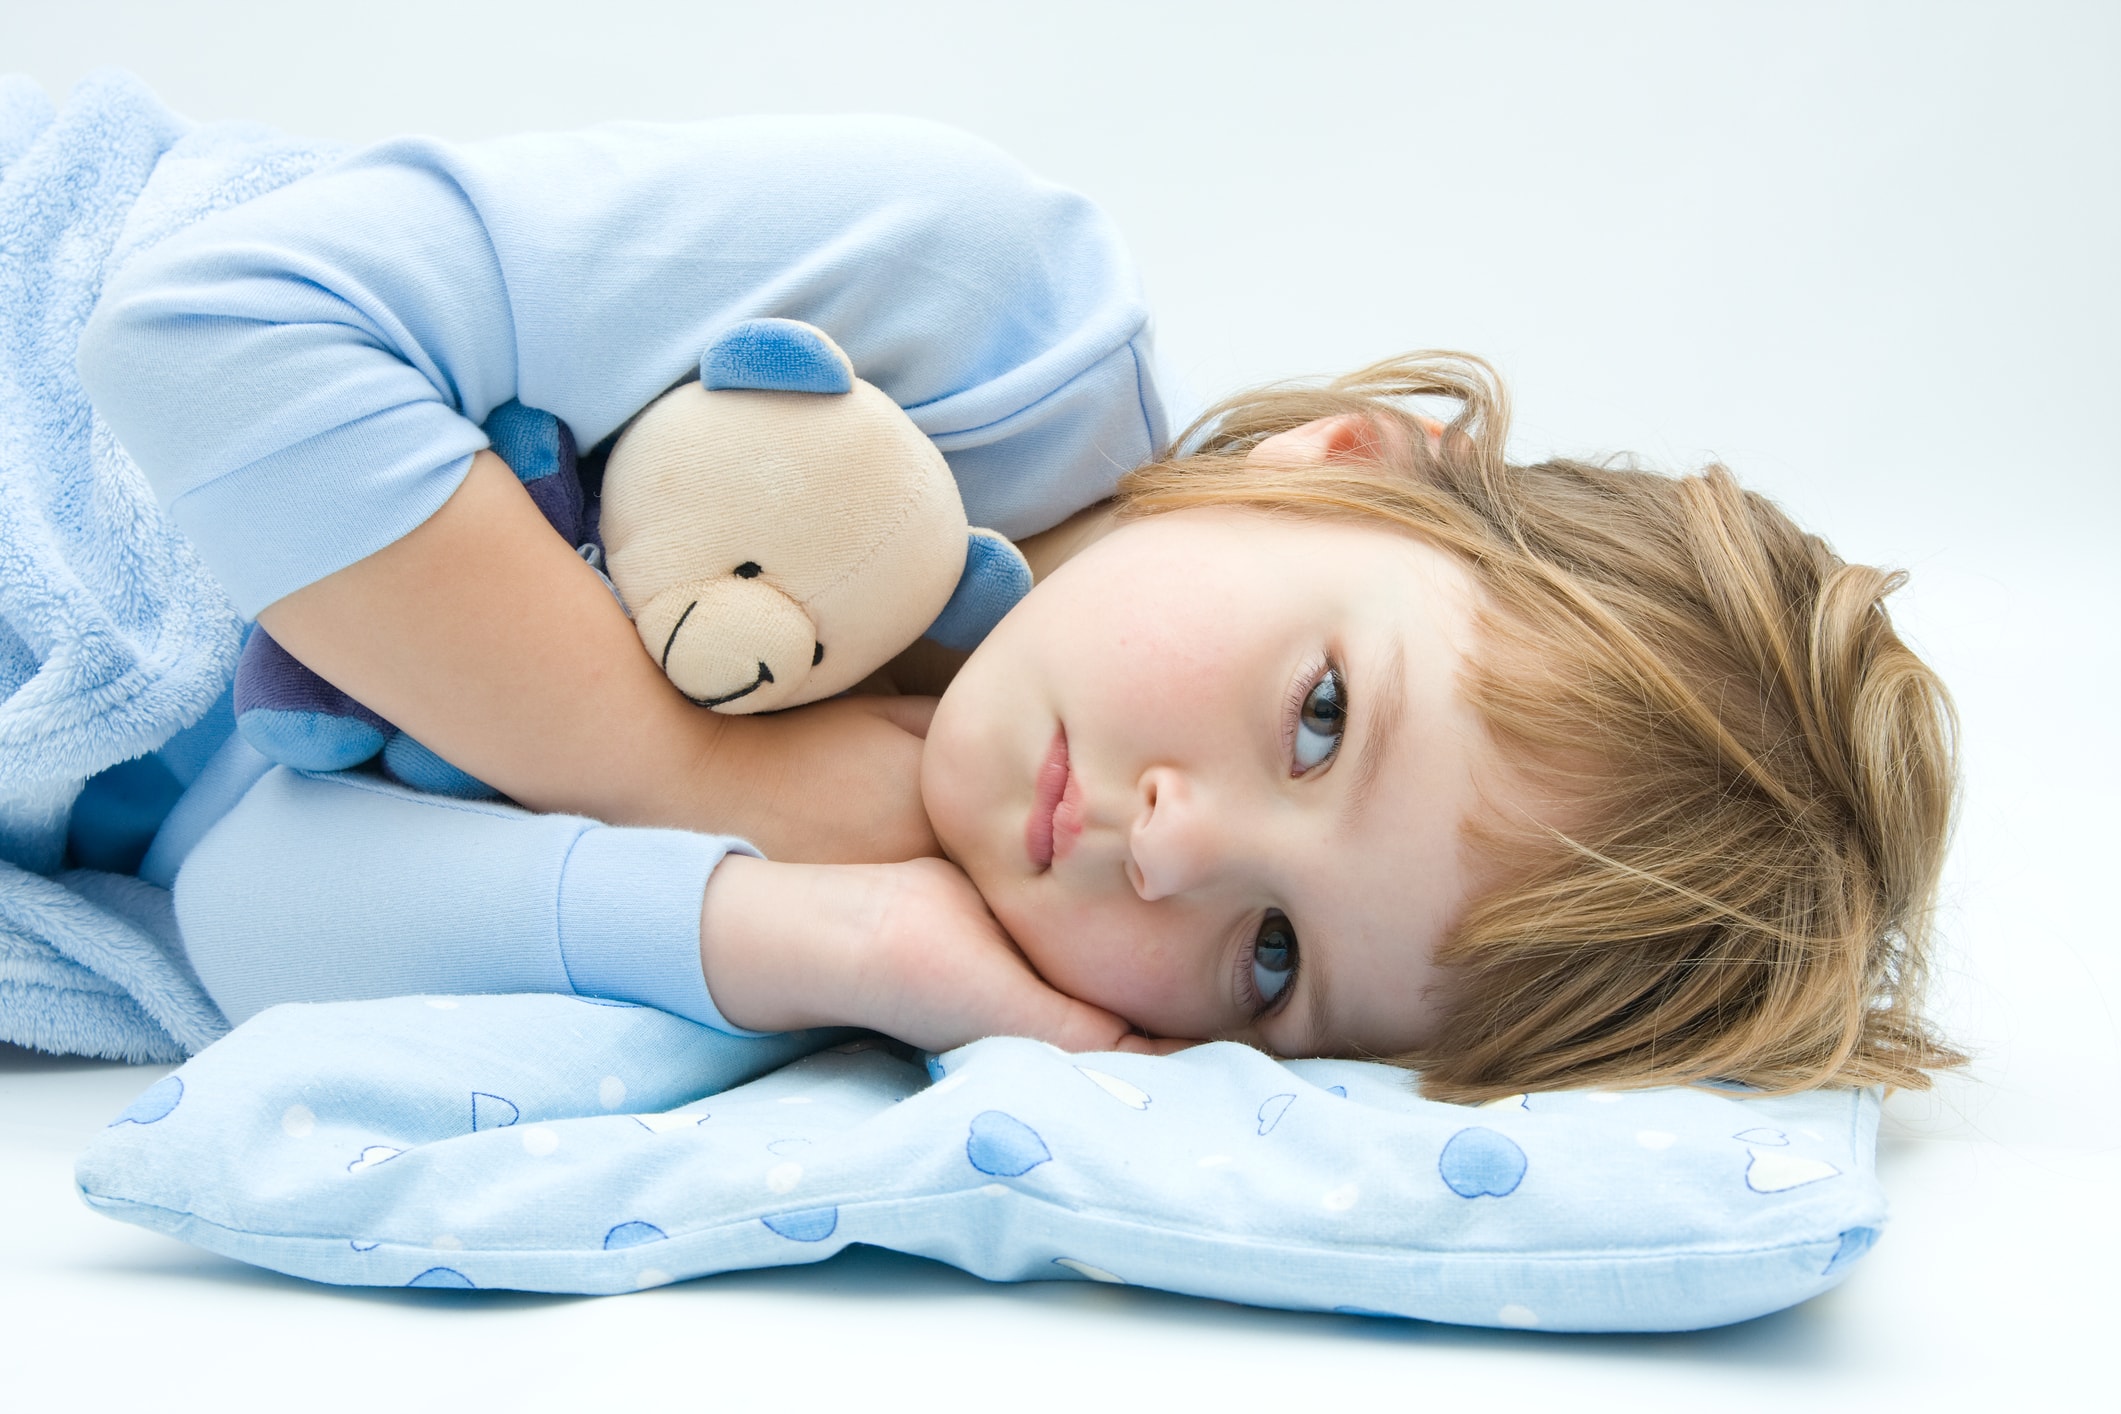 Sleep Problems in Children Becoming More Common